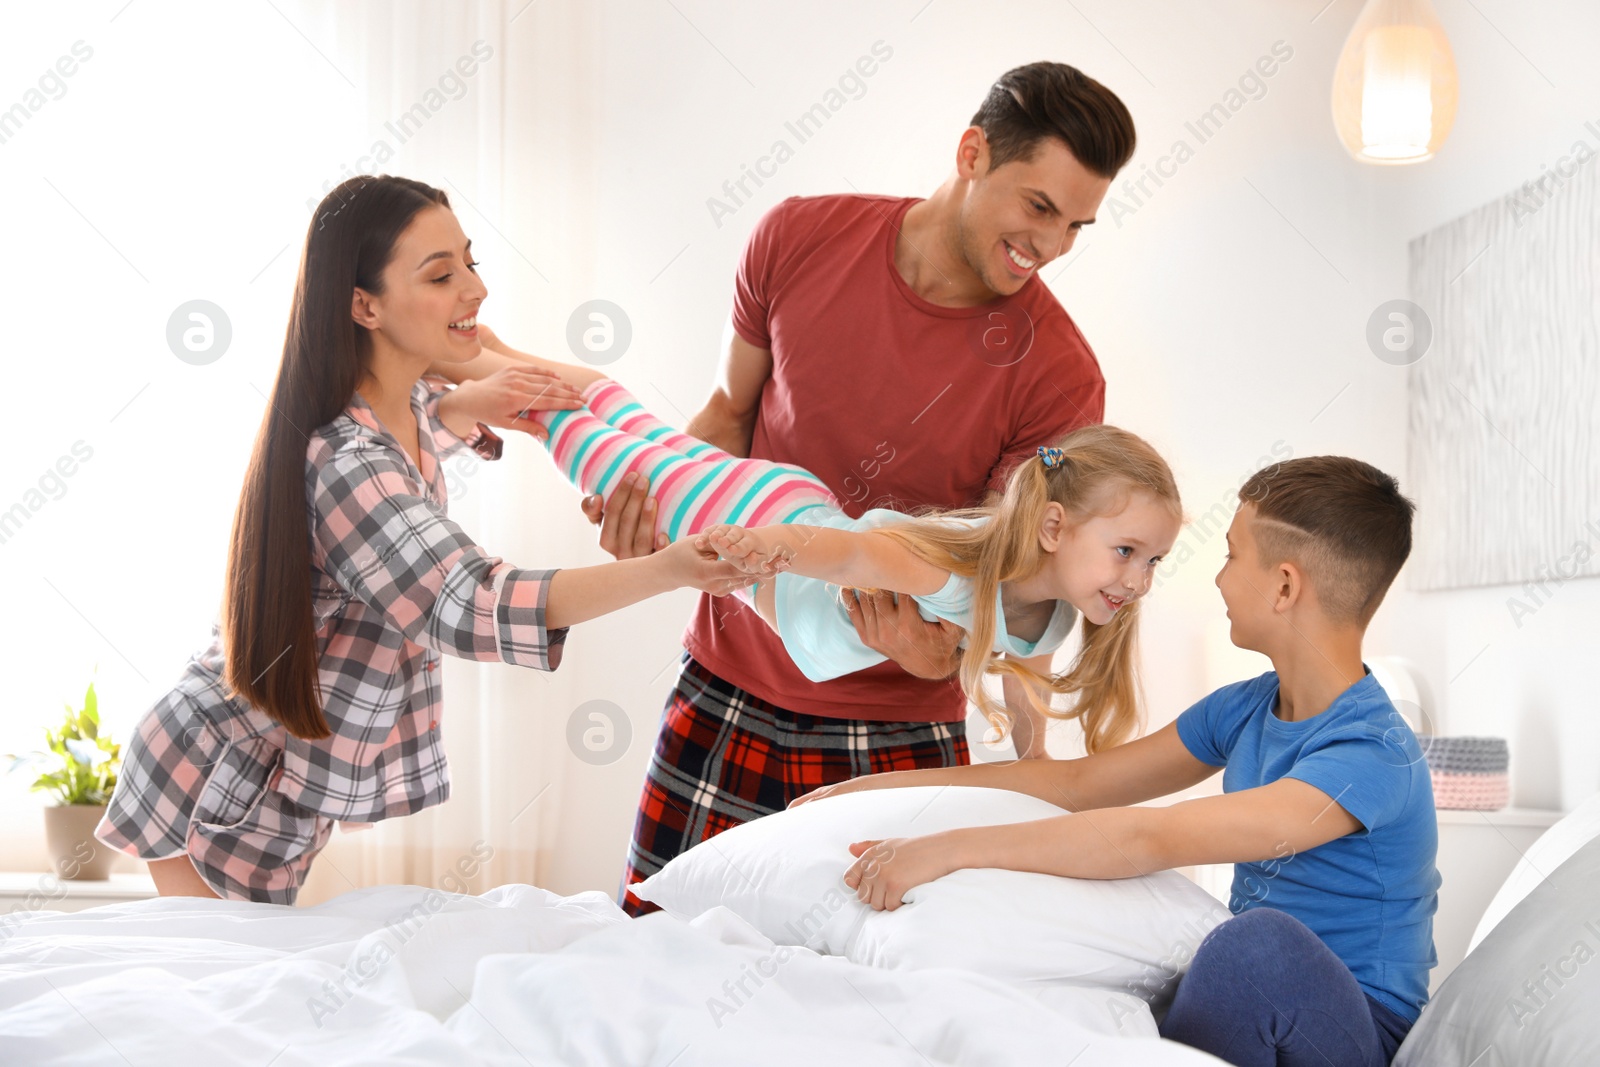 Photo of Happy young family with children having fun in bedroom